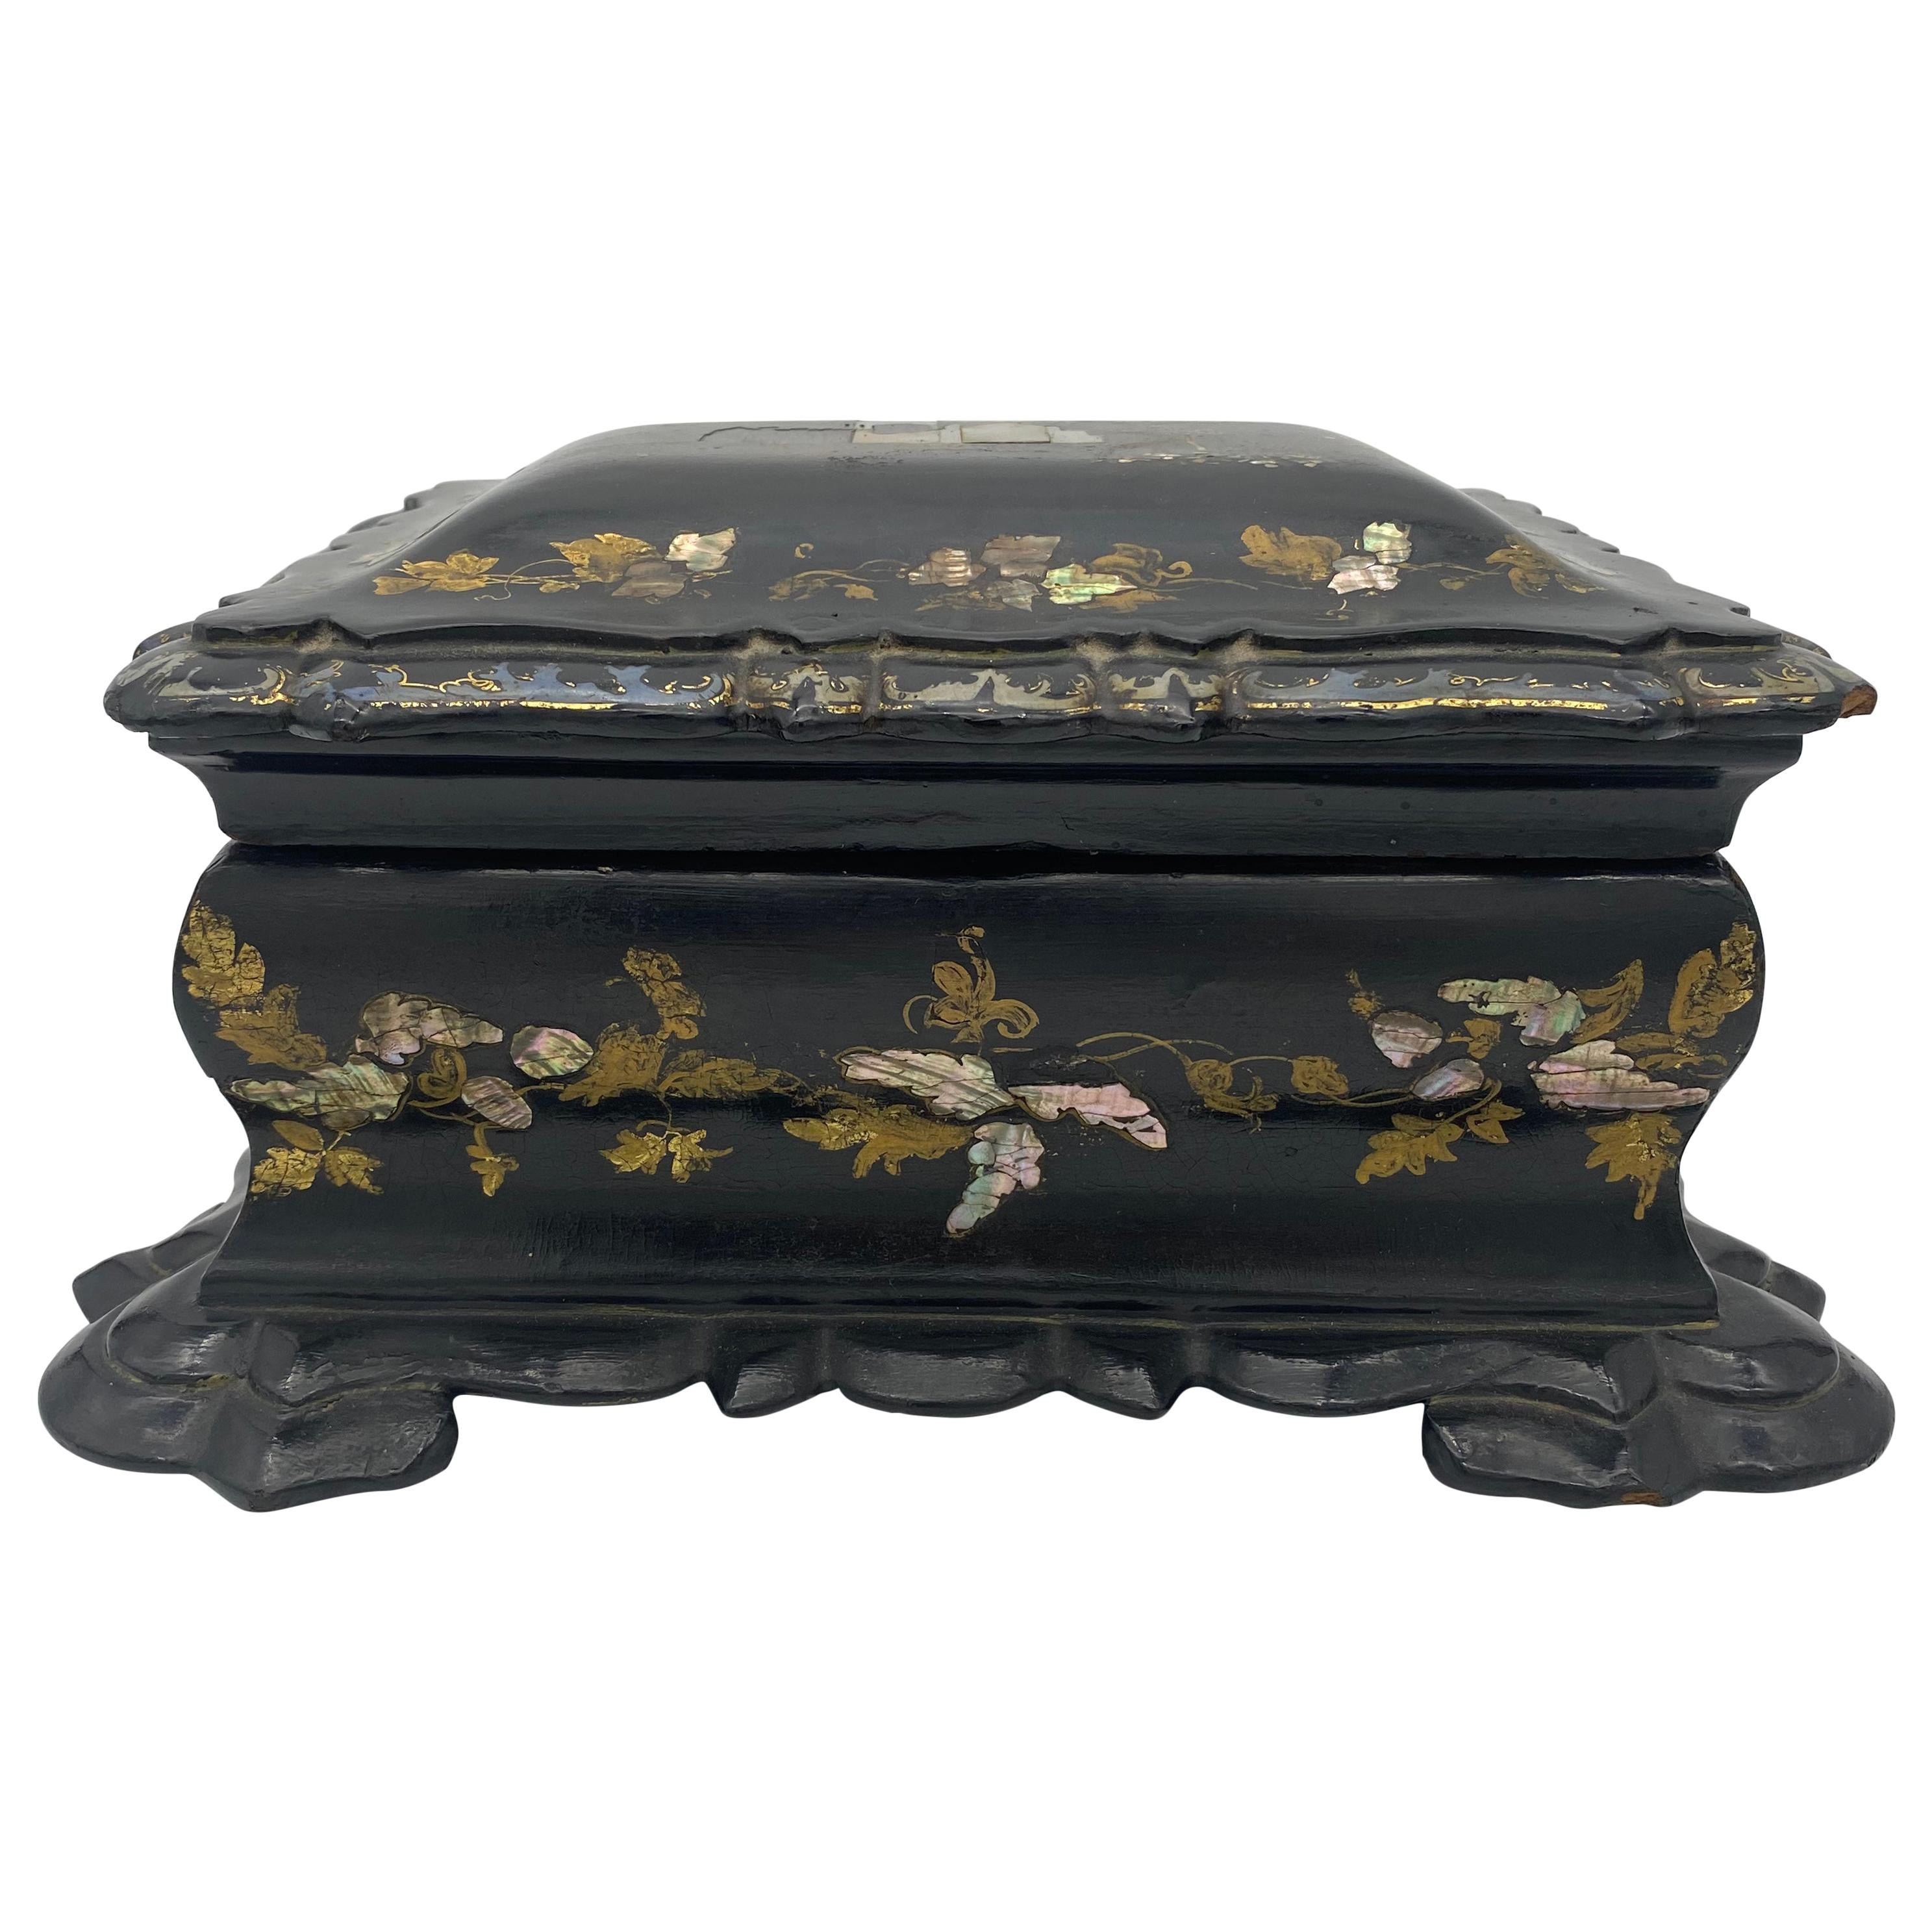 19th Century Chinese Black Lacquer Tea Caddy